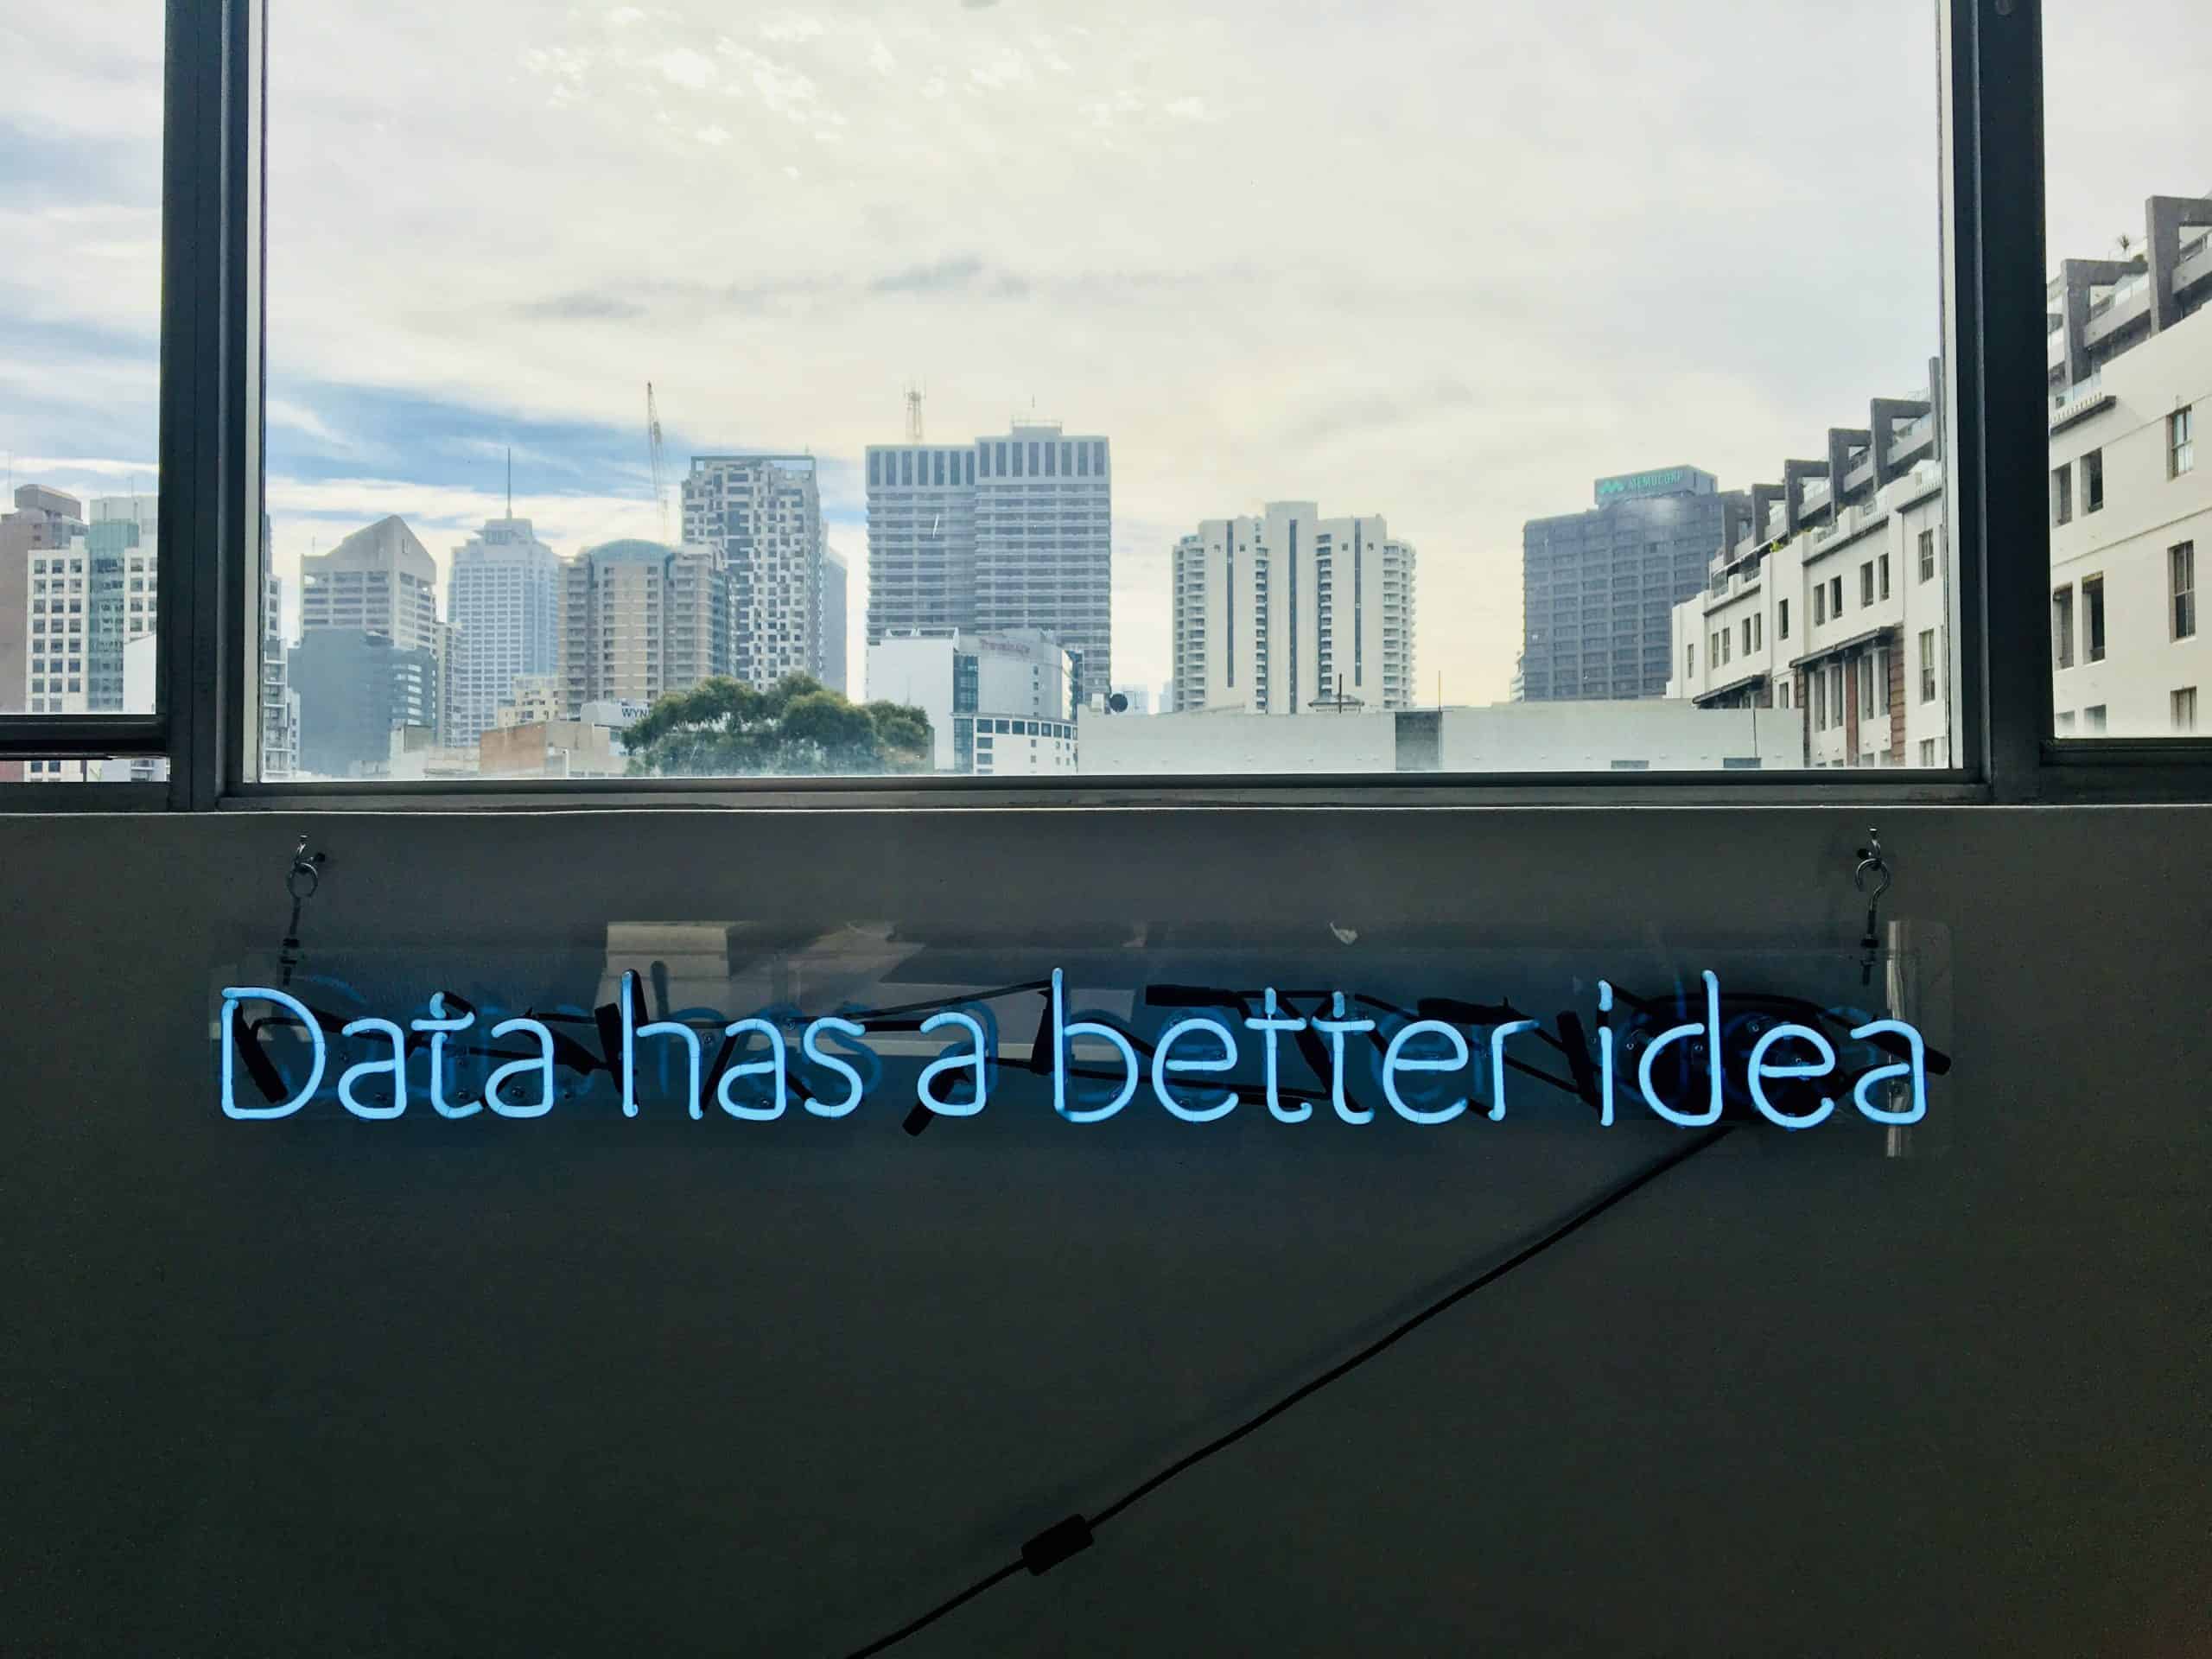 neon sign on a wall which says 'data has a better idea'